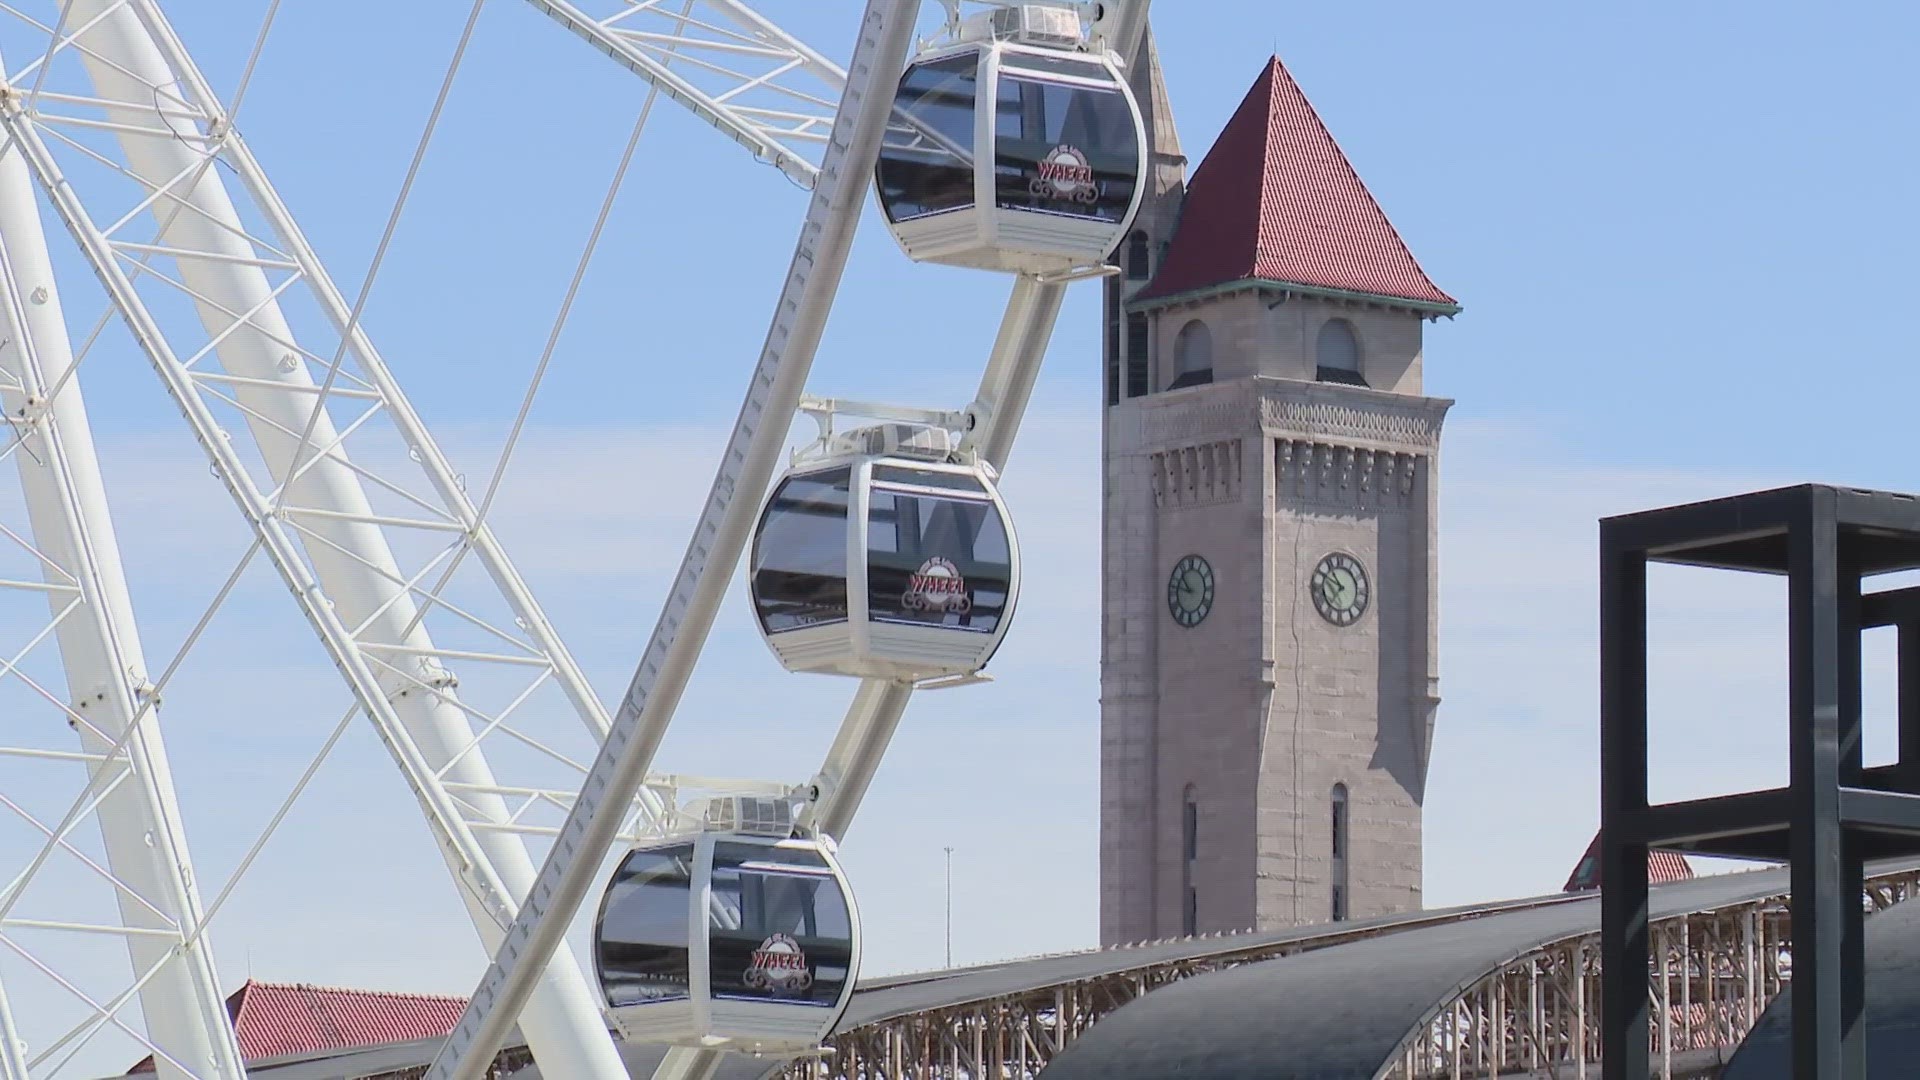 This weekend, Taylor Swift's new album will be playing in the St. Louis Wheel's specially decorated Gondola 13. The listening party tickets are $25 per person.